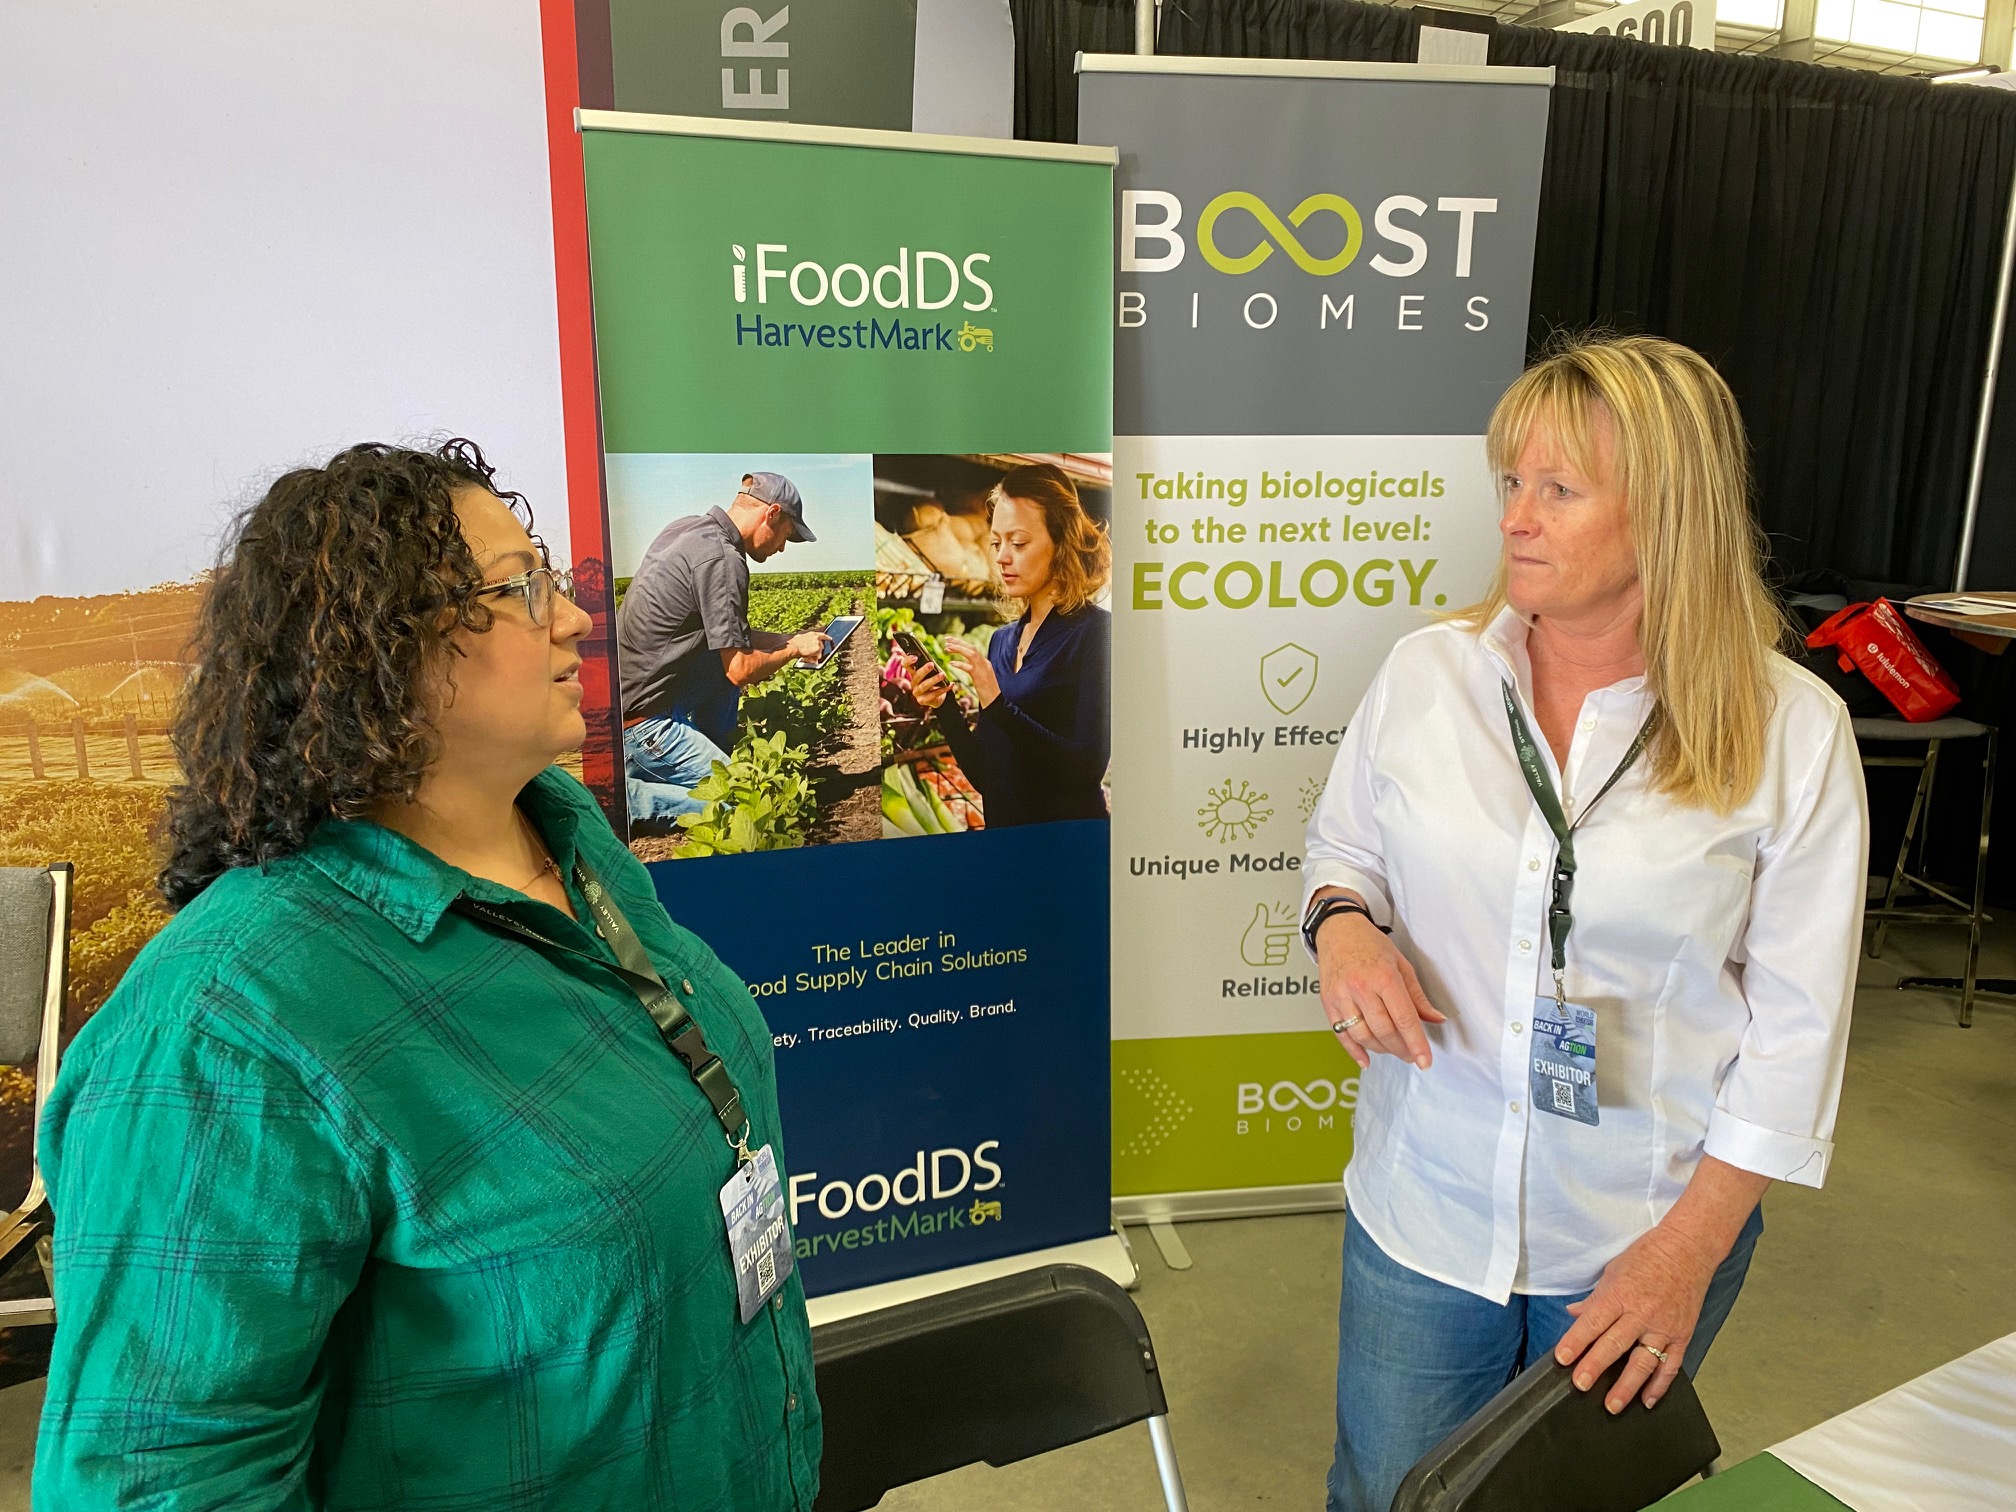  Kathy Nunez-Haldezos of iFoodDS and Johnna Hepner of Boost Biomes take a break from visitors. iFoodDS provides supply chain traceability, supporting harvesting, and packing and processing workflows. Boost Biomes develops and delivers resilient microbial solutions for crops.